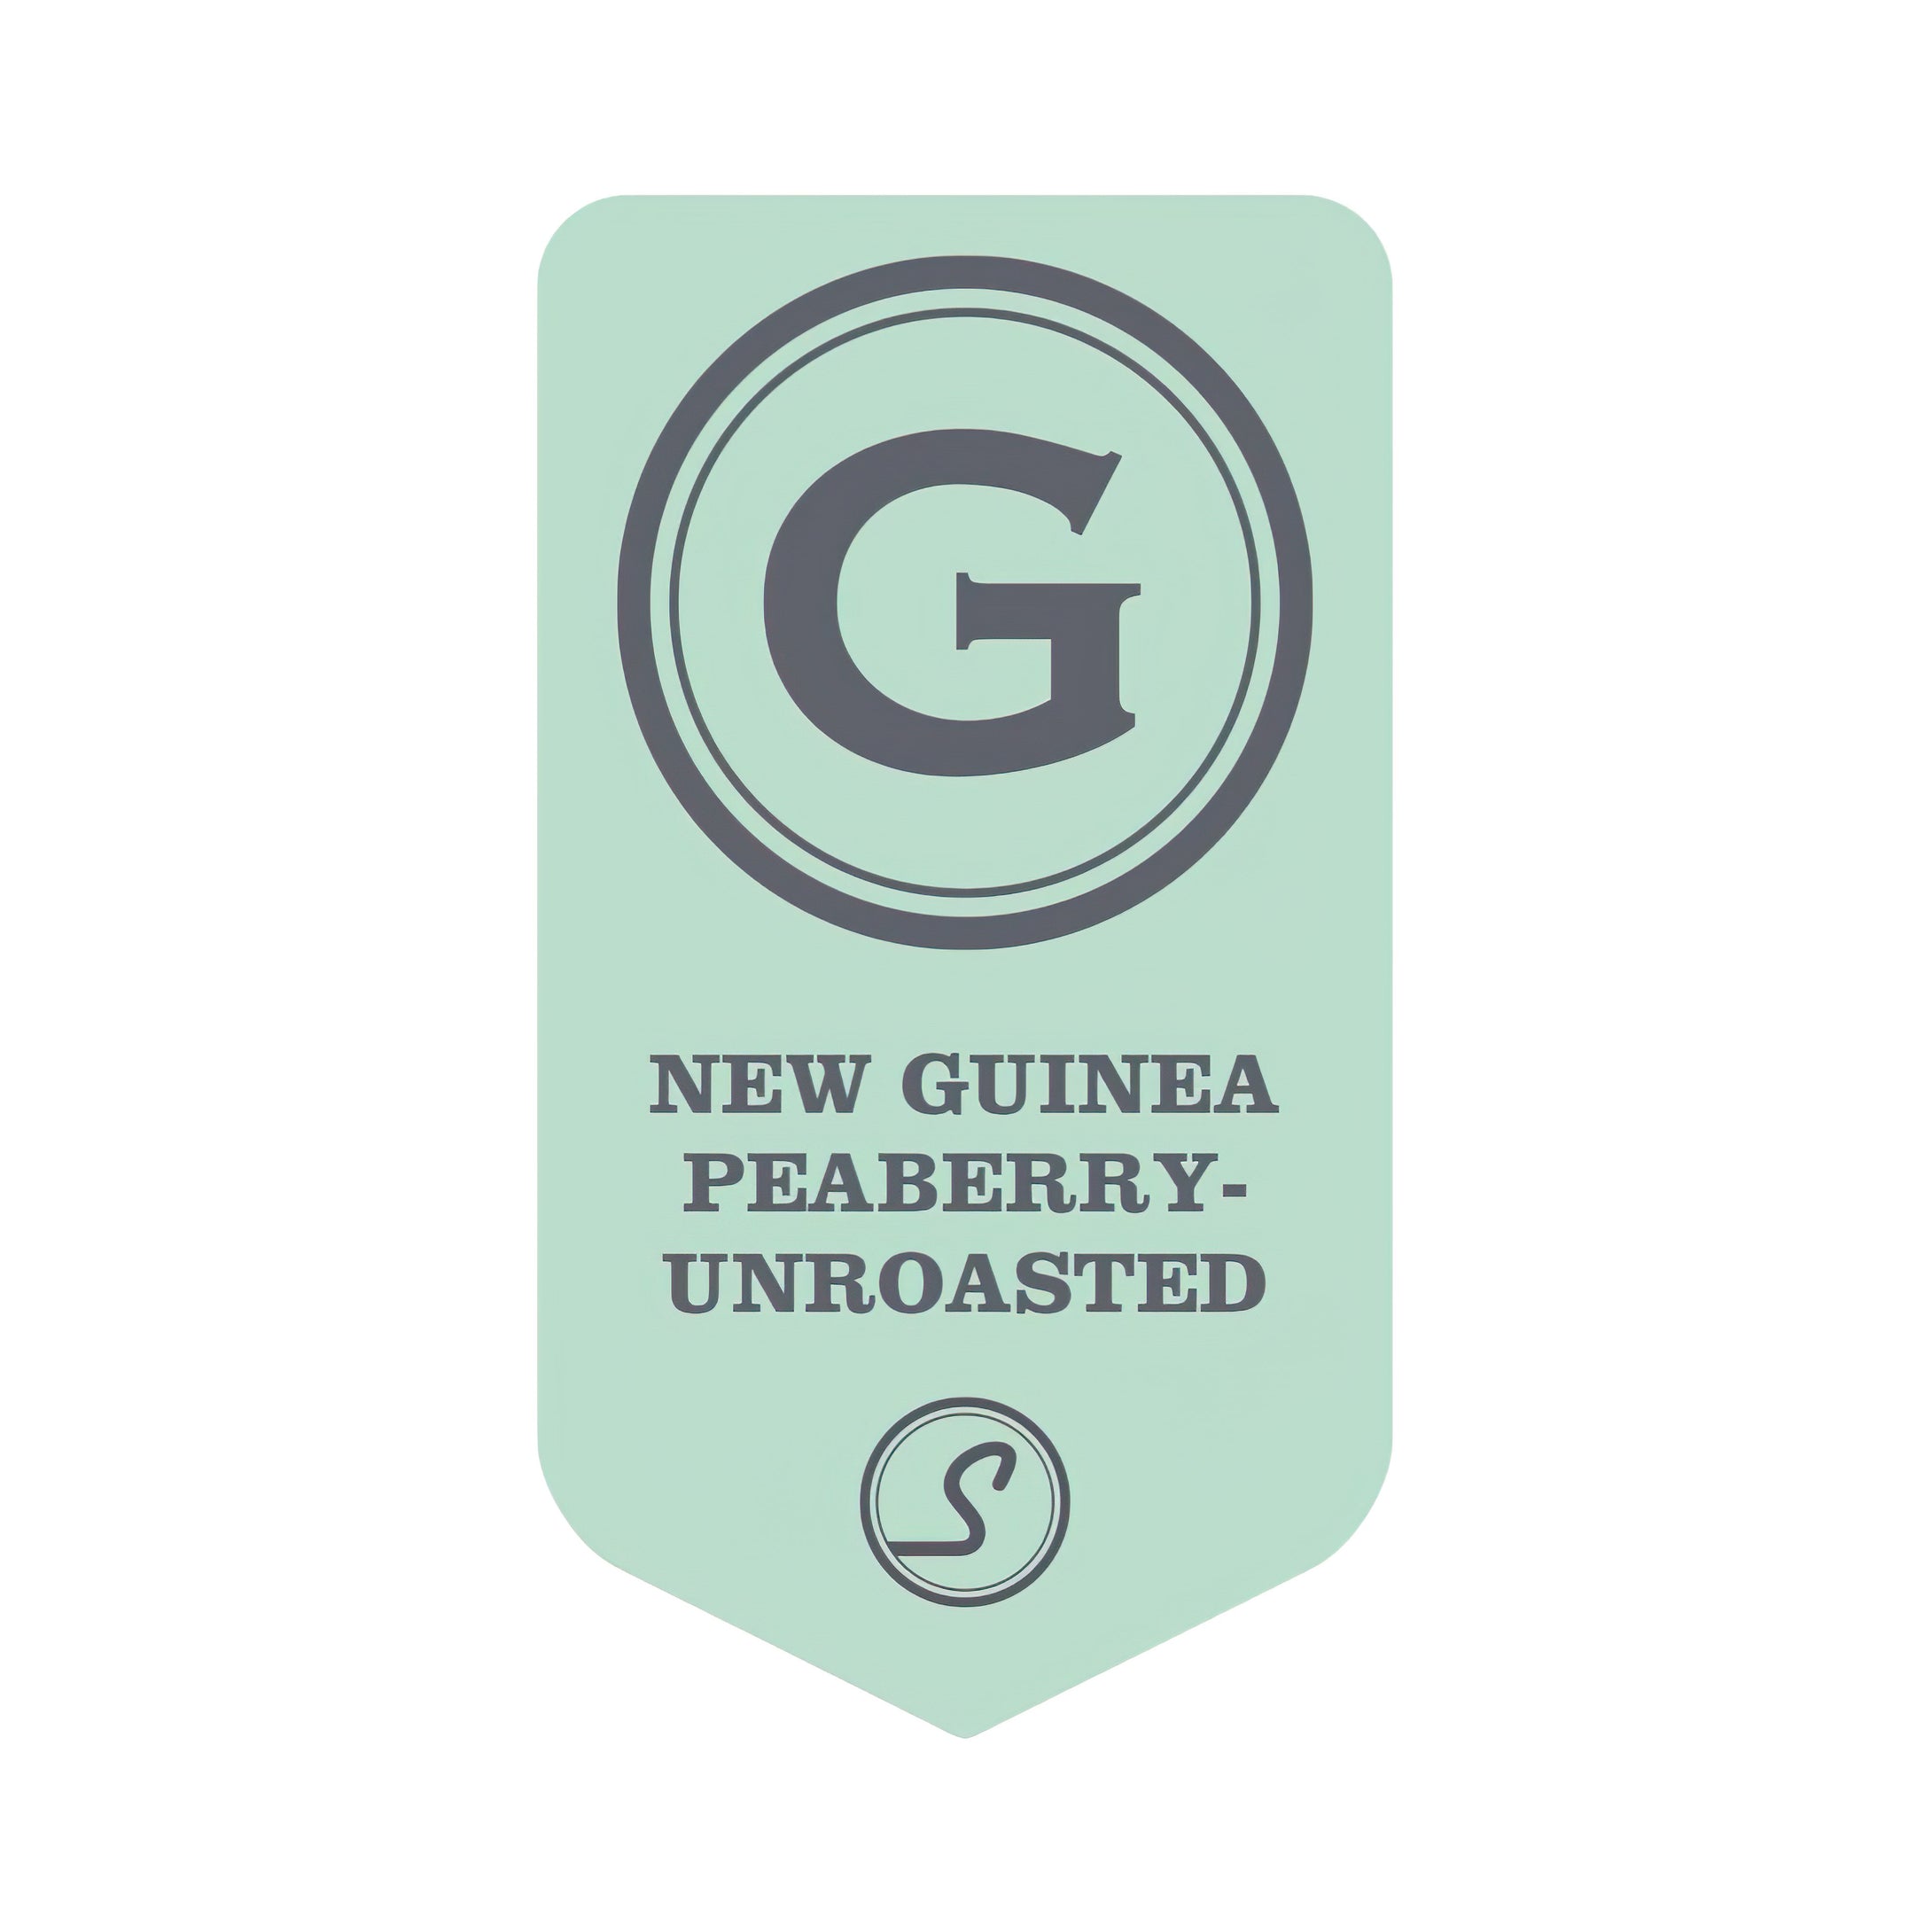 New Guinea Peaberry - UNROASTED